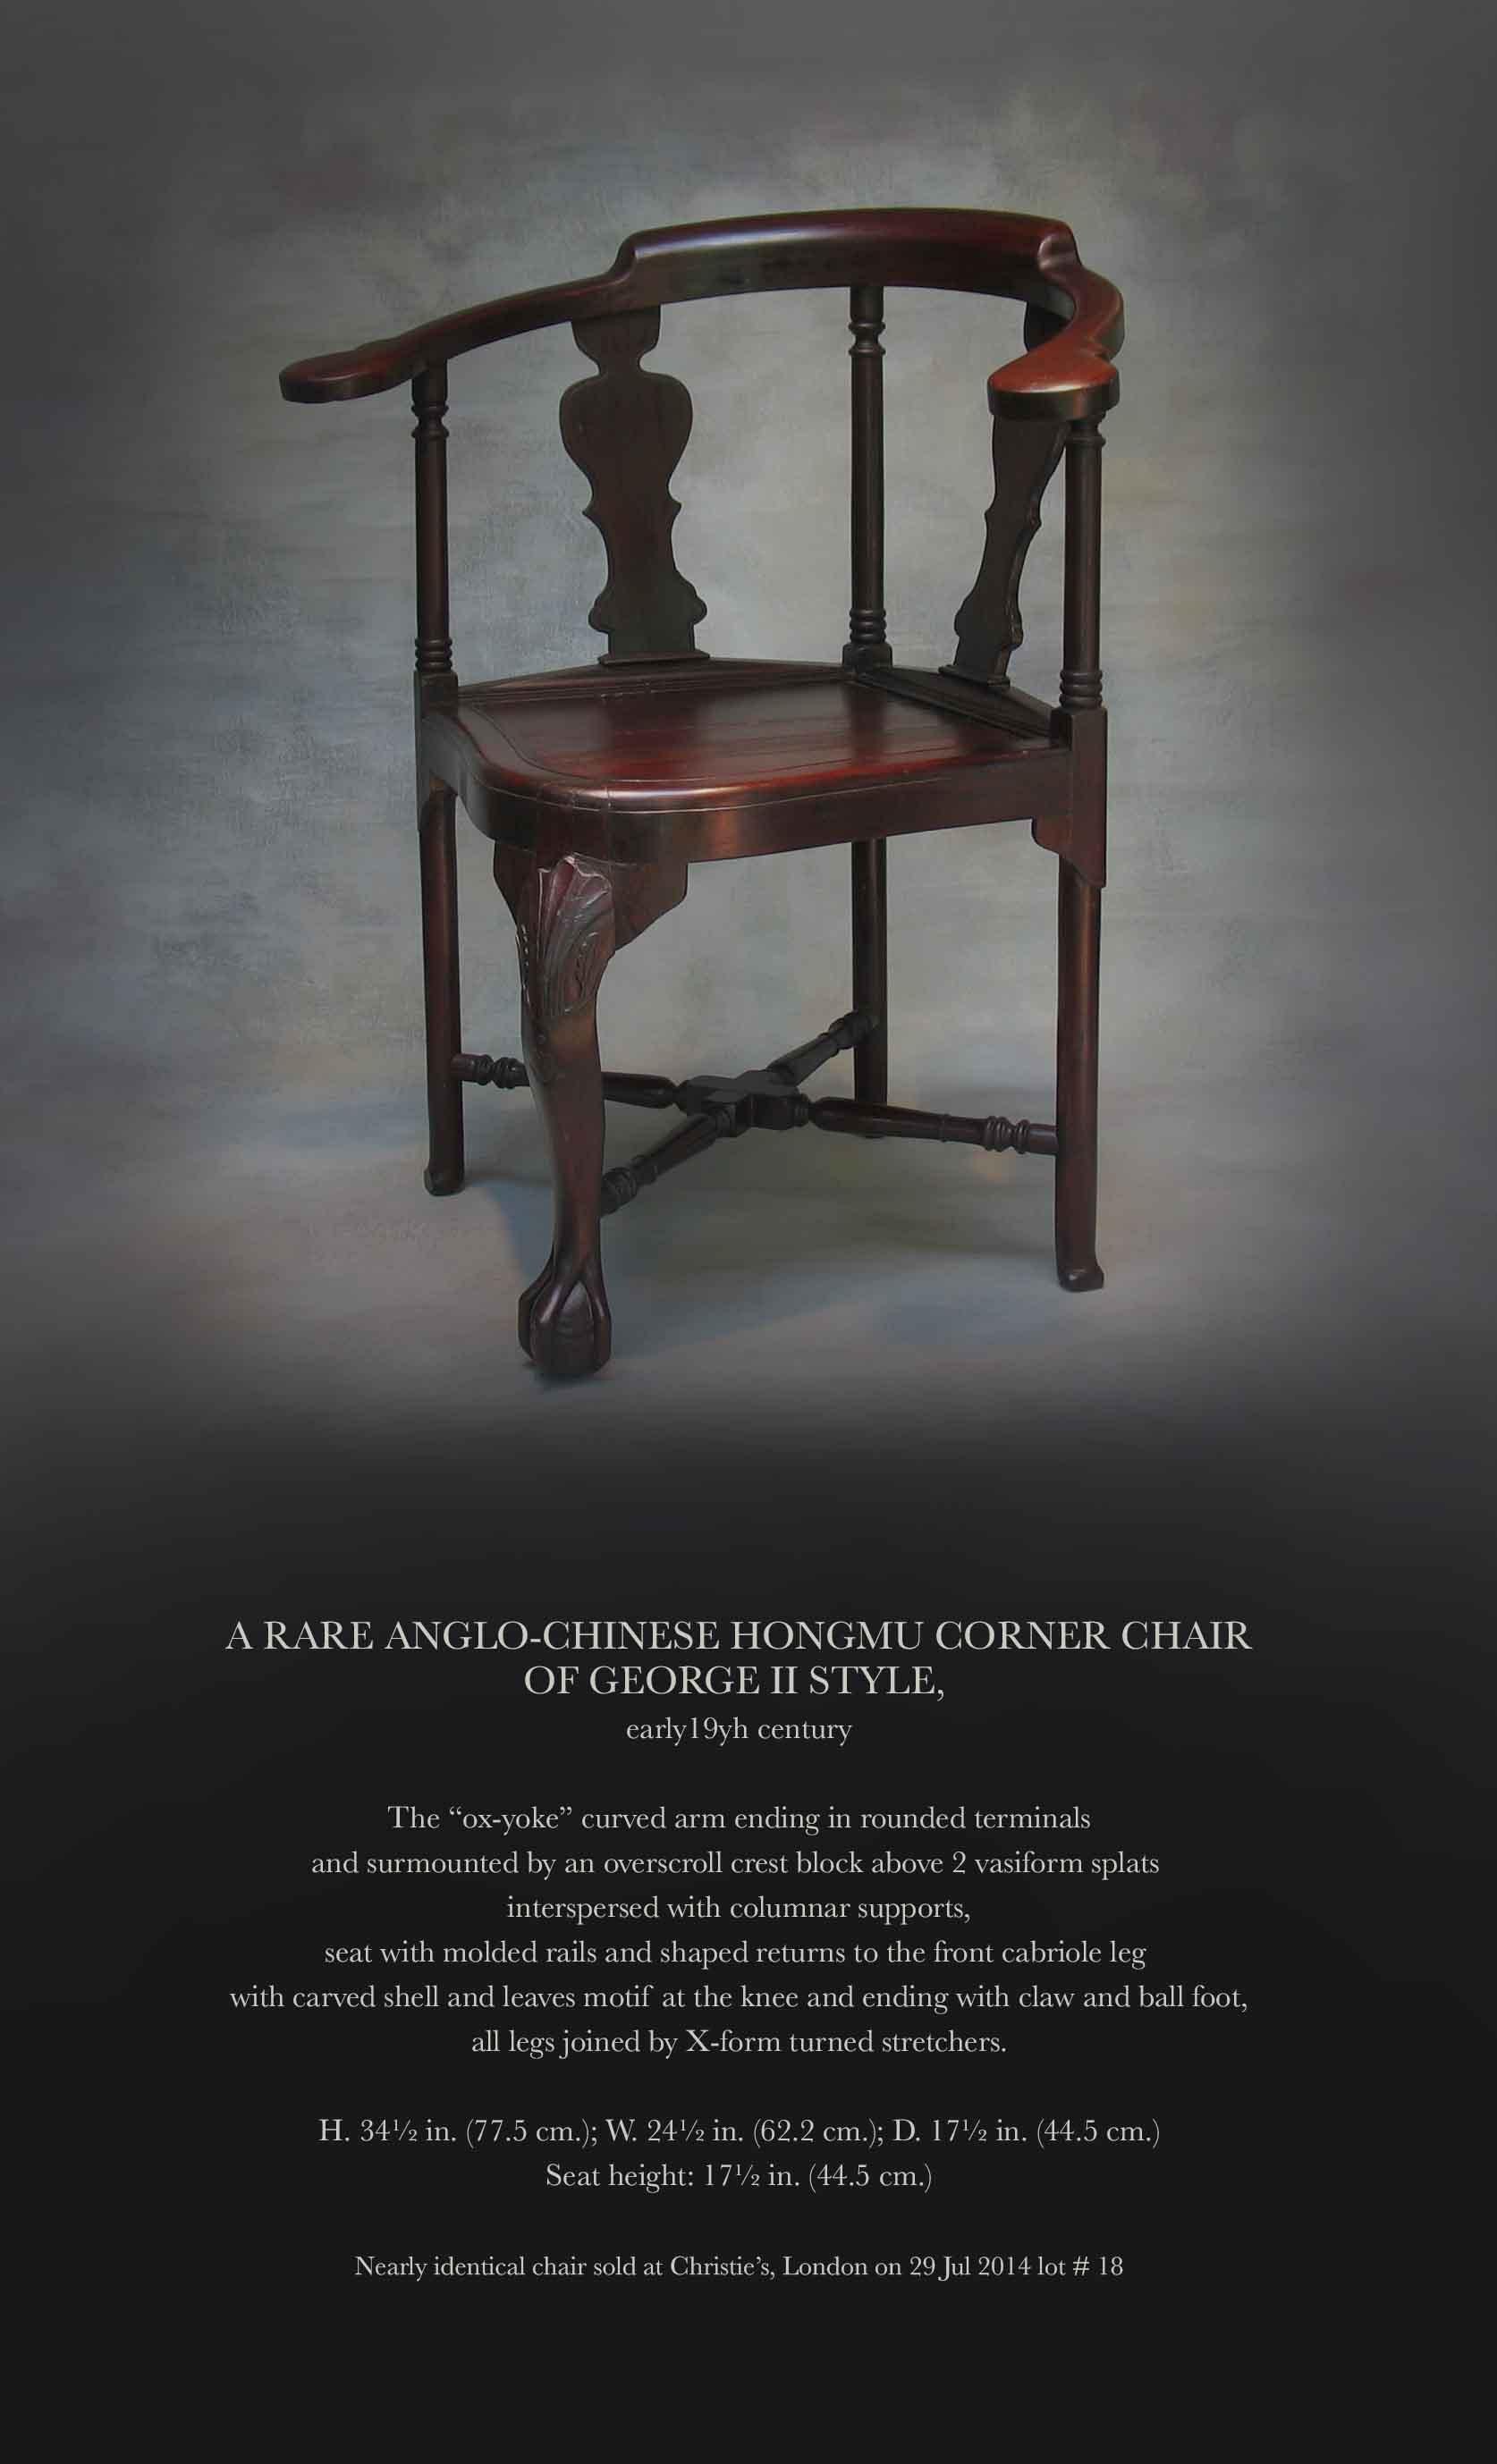 A RARE ANGLO-CHINESE HONGMU CORNER CHAIR
OF GEORGE II STYLE
Early 19th Century

The “ox-yoke” curved arm ending in rounded terminals
and surmounted by an overscroll crest block above 2 vasiform splats
interspersed with columnar supports,
seat with